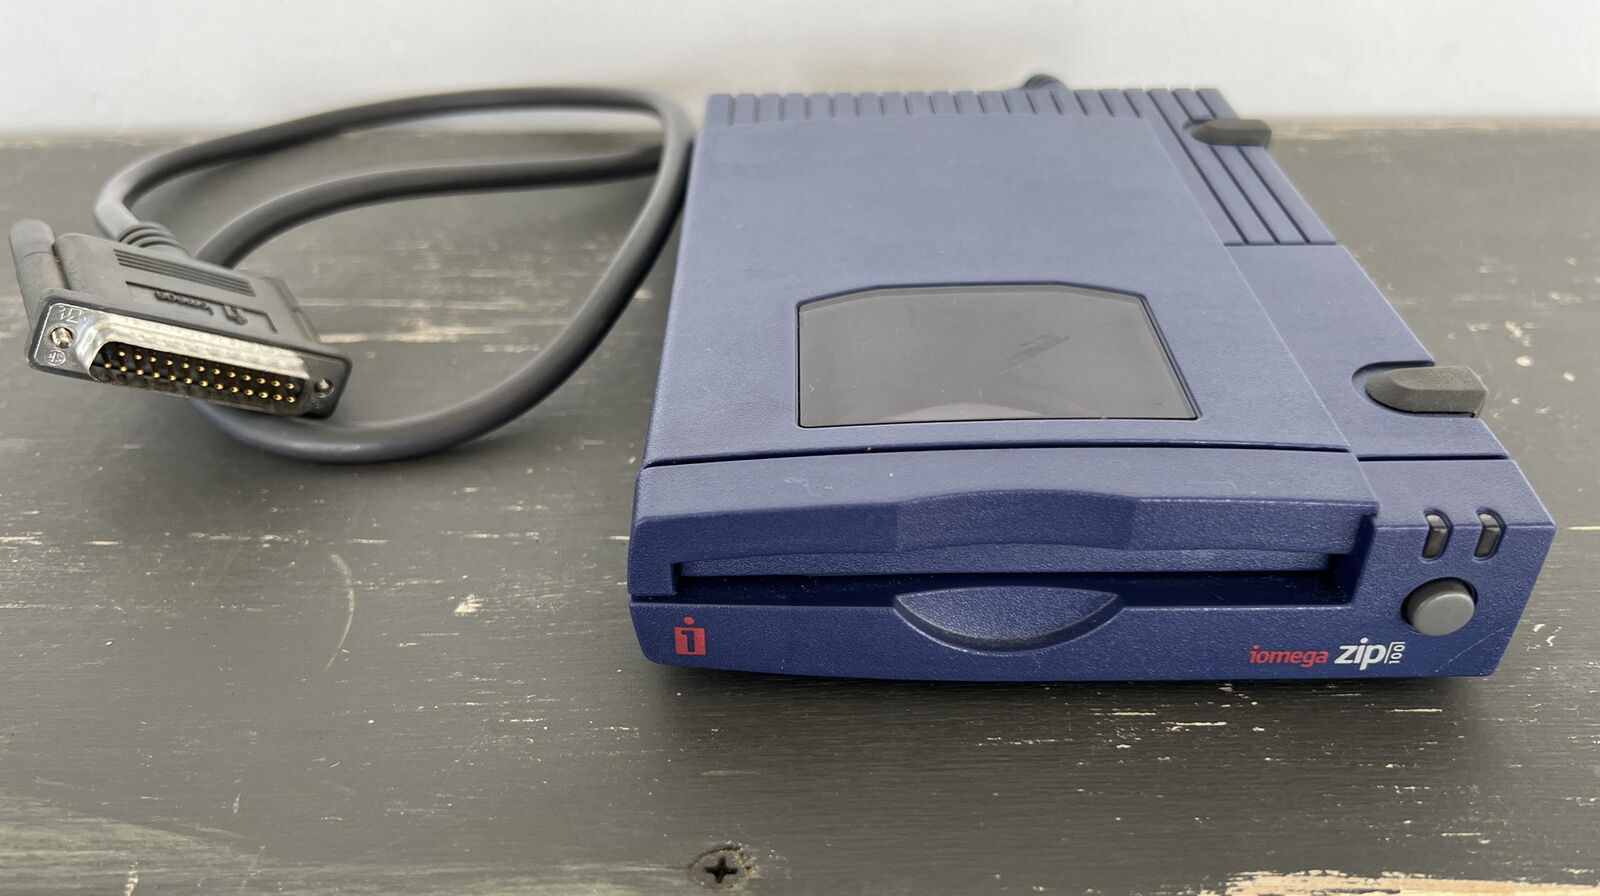 iOMEGA ZIP 100 100MB Z100P2 External  Parallel Zip  Drive W/ Cord Untested